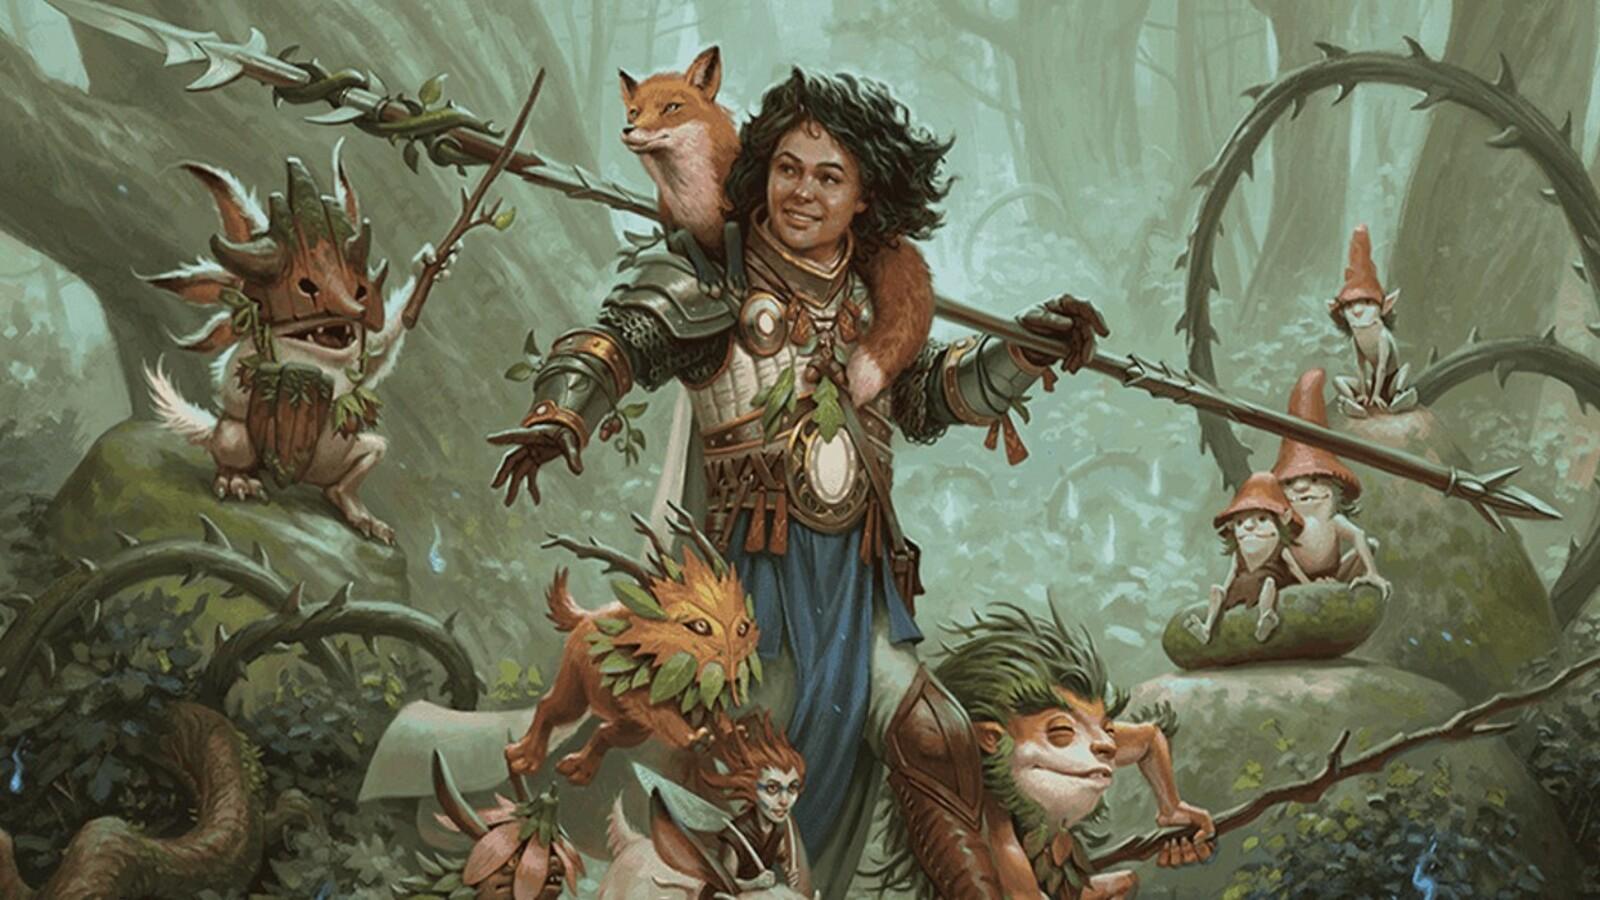 MTG Virtue and Valor Decklist - Ellivere is surrounded by forest friends